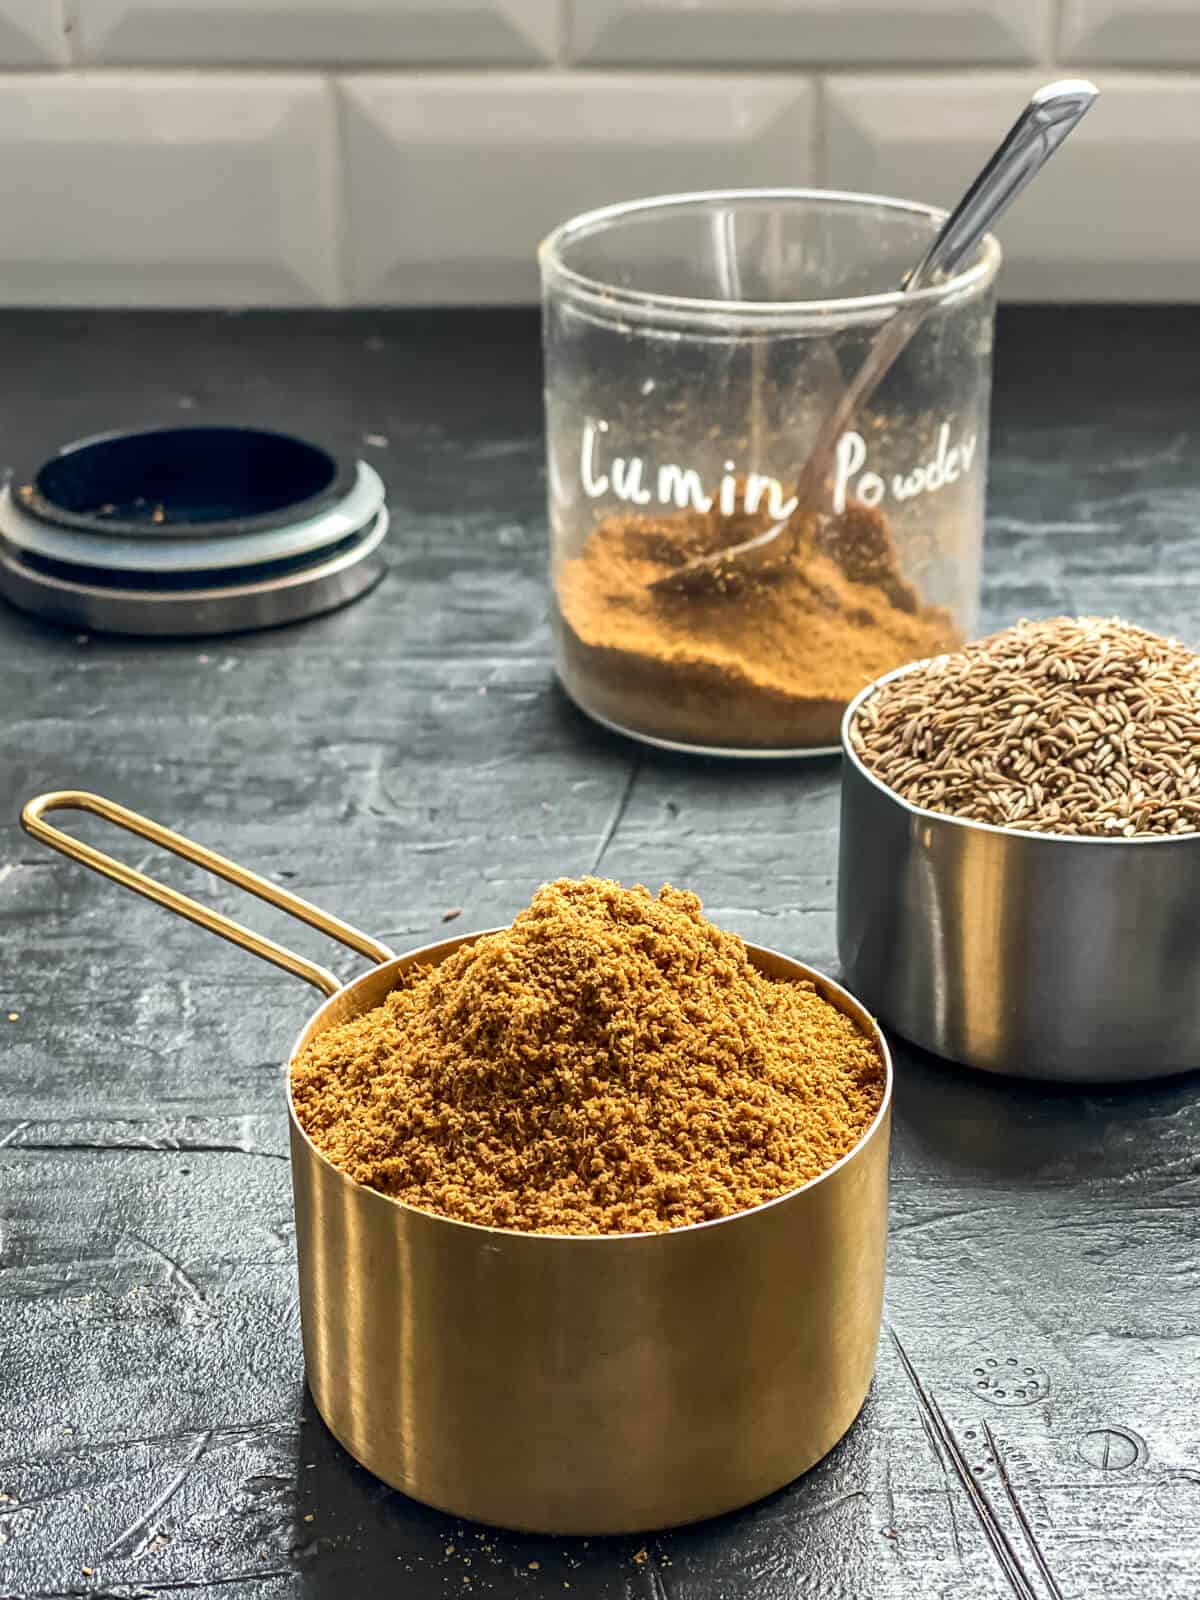 A large scoop of cumin powder, with another scoop of cumin seeds behind it.